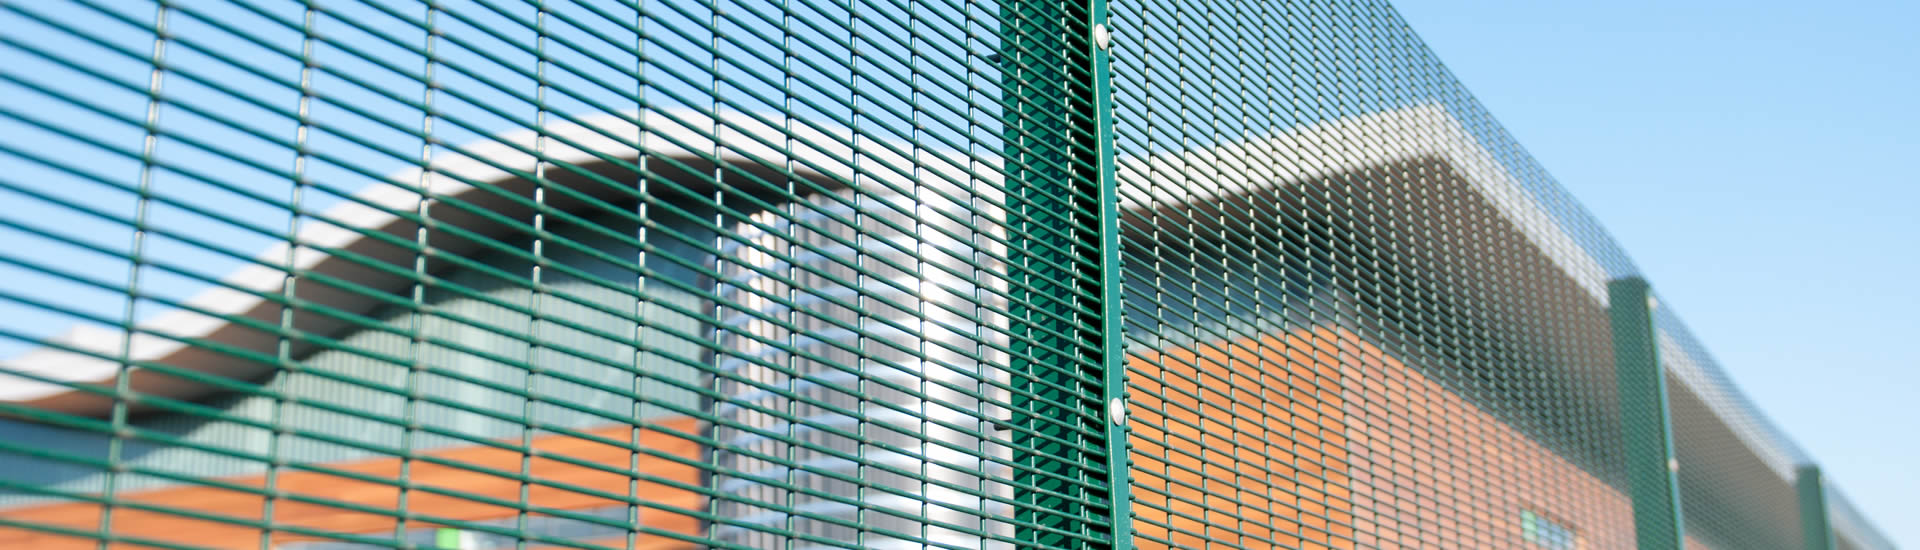 Green color 358 high security fence is used as security wall in the factory.